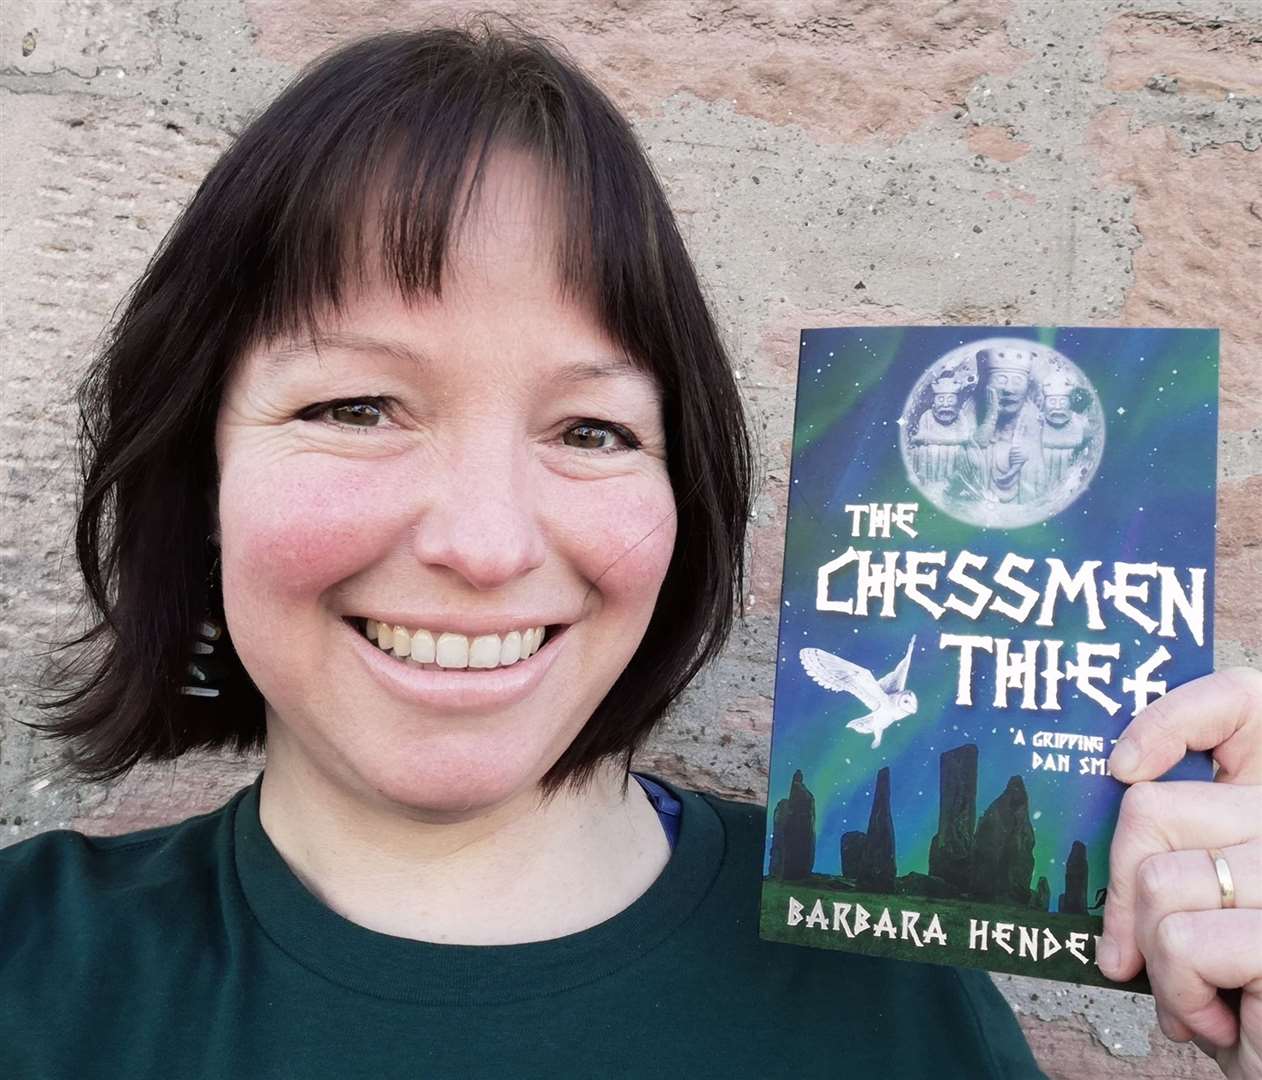 Barbara Henderson with her new book, The Chessmen Thief.